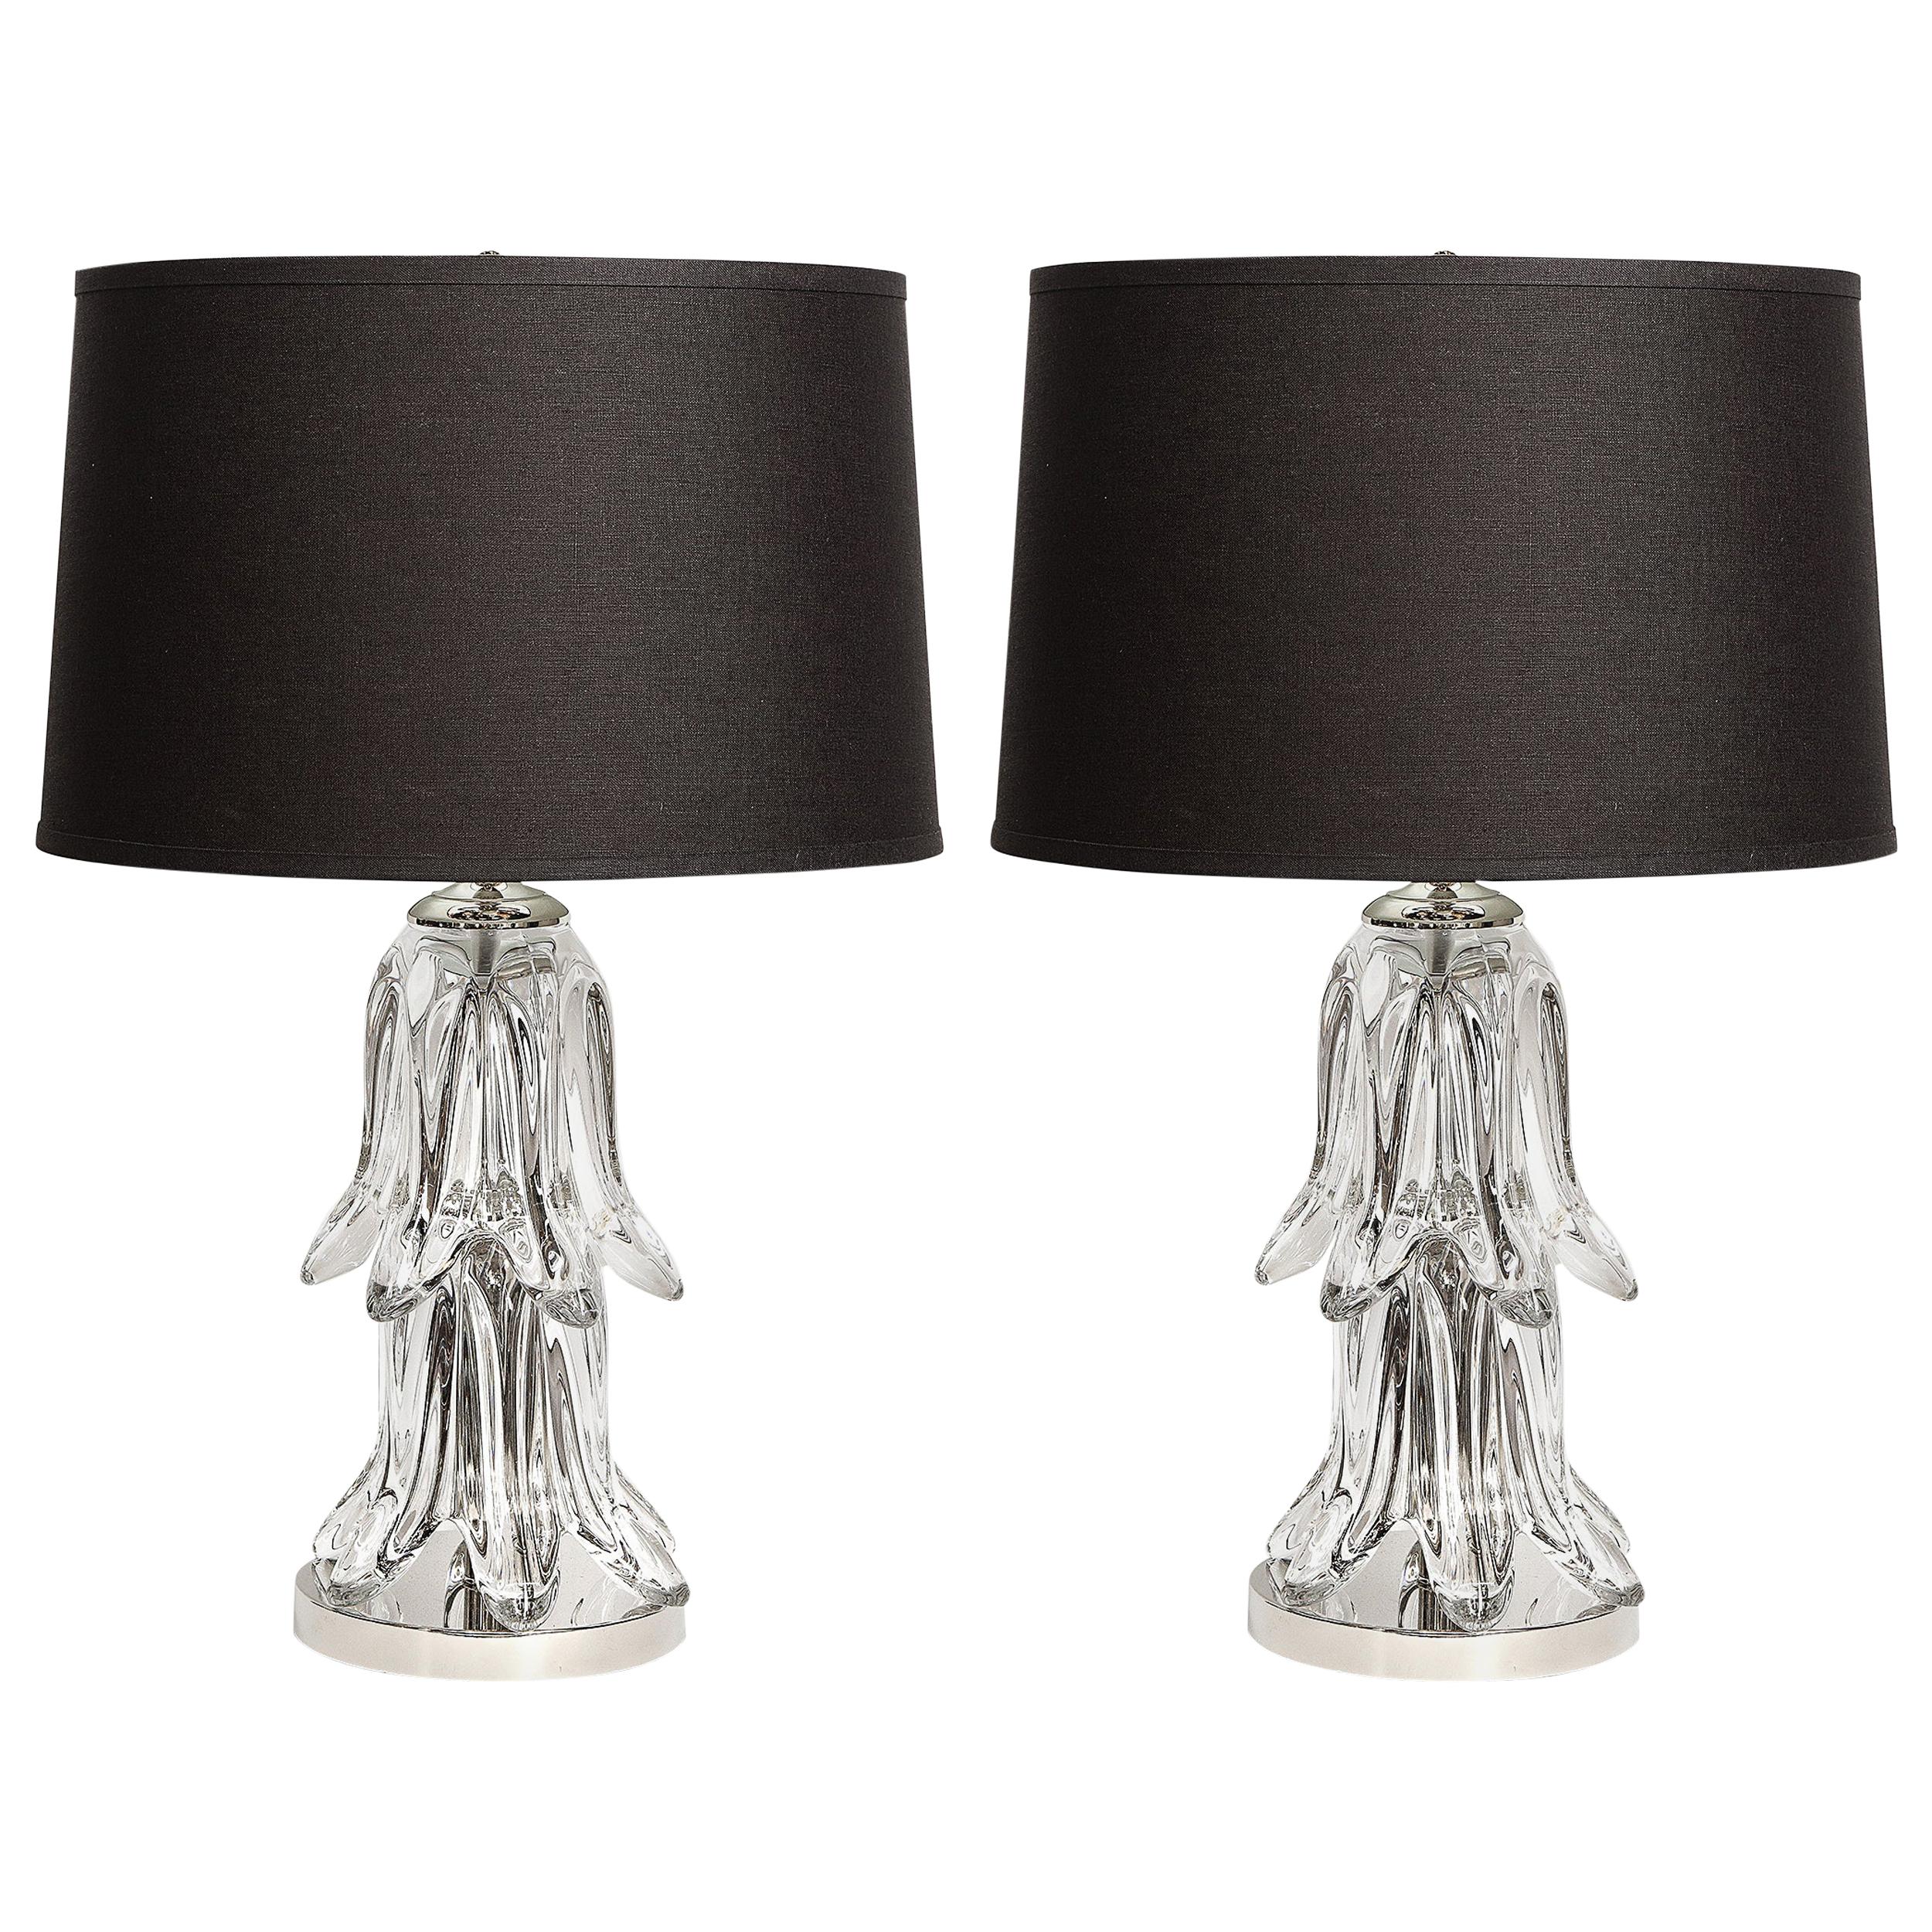 Pair of Mid-Century Modern Sculptural Translucent Glass and Chrome Table Lamps